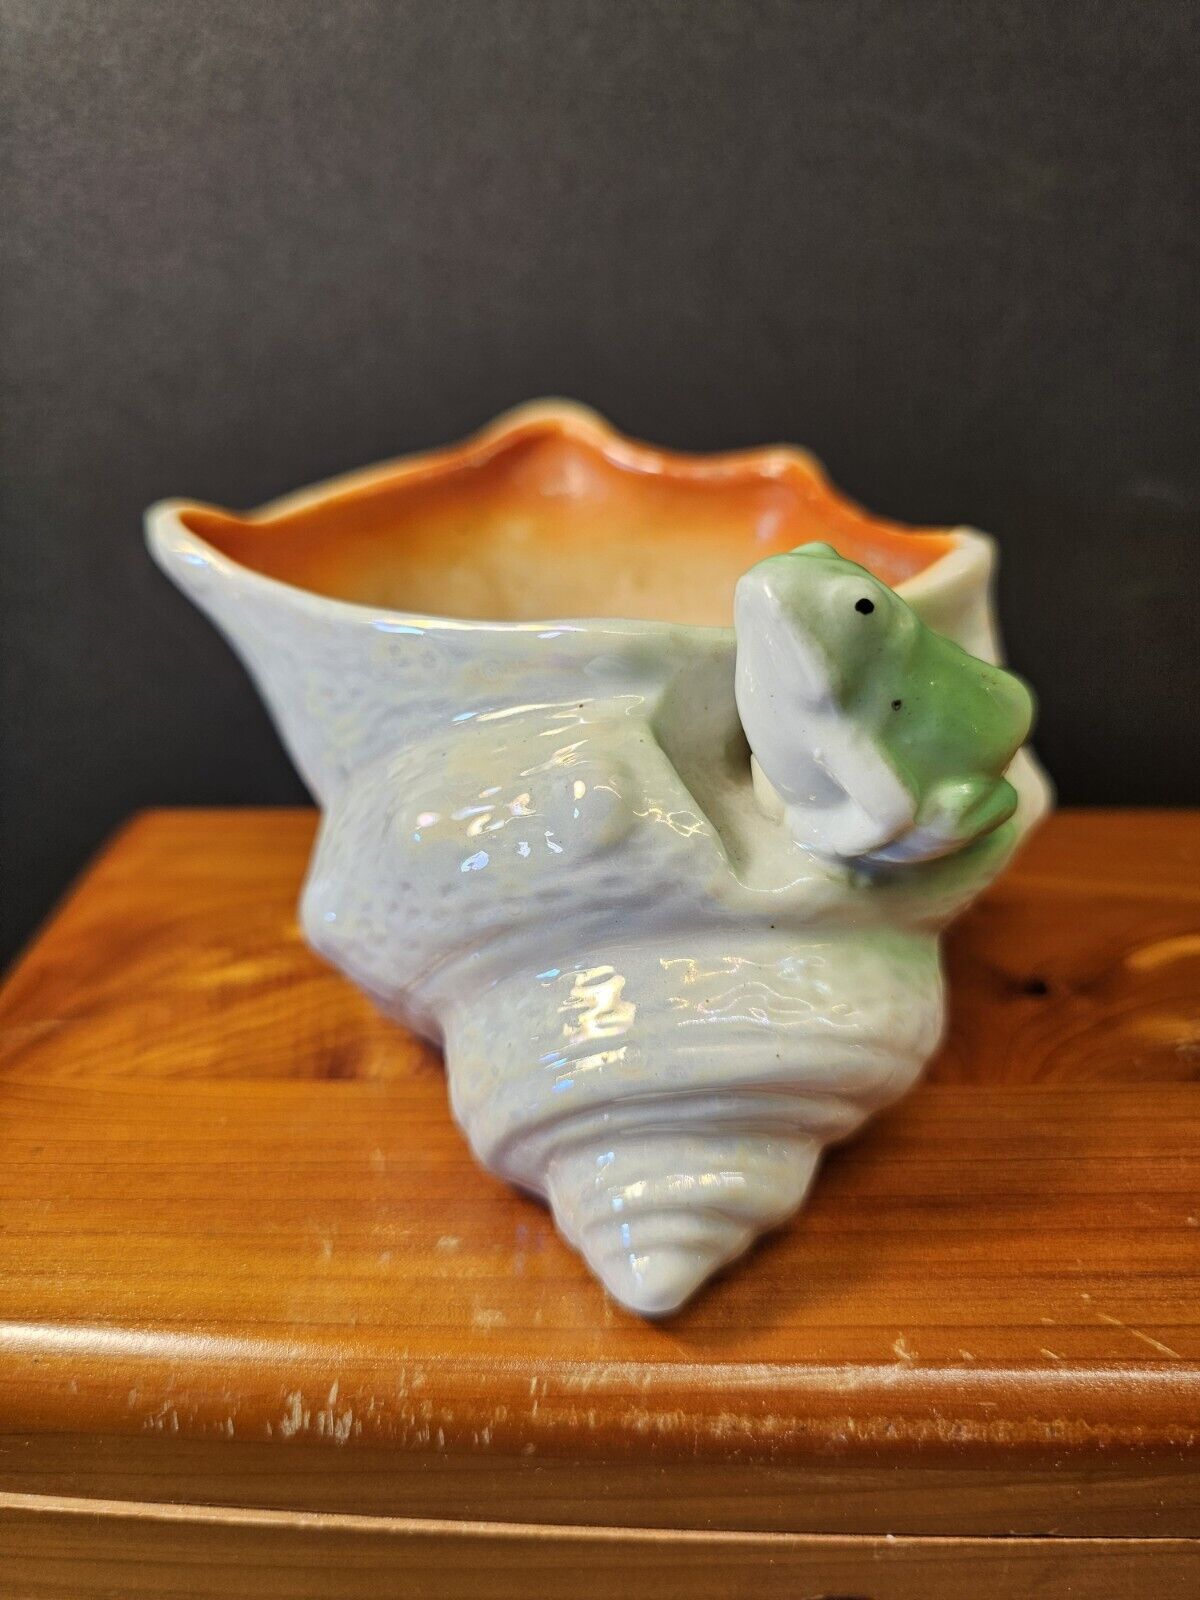 Vintage Seashell, Ceramic Planter With A Frog